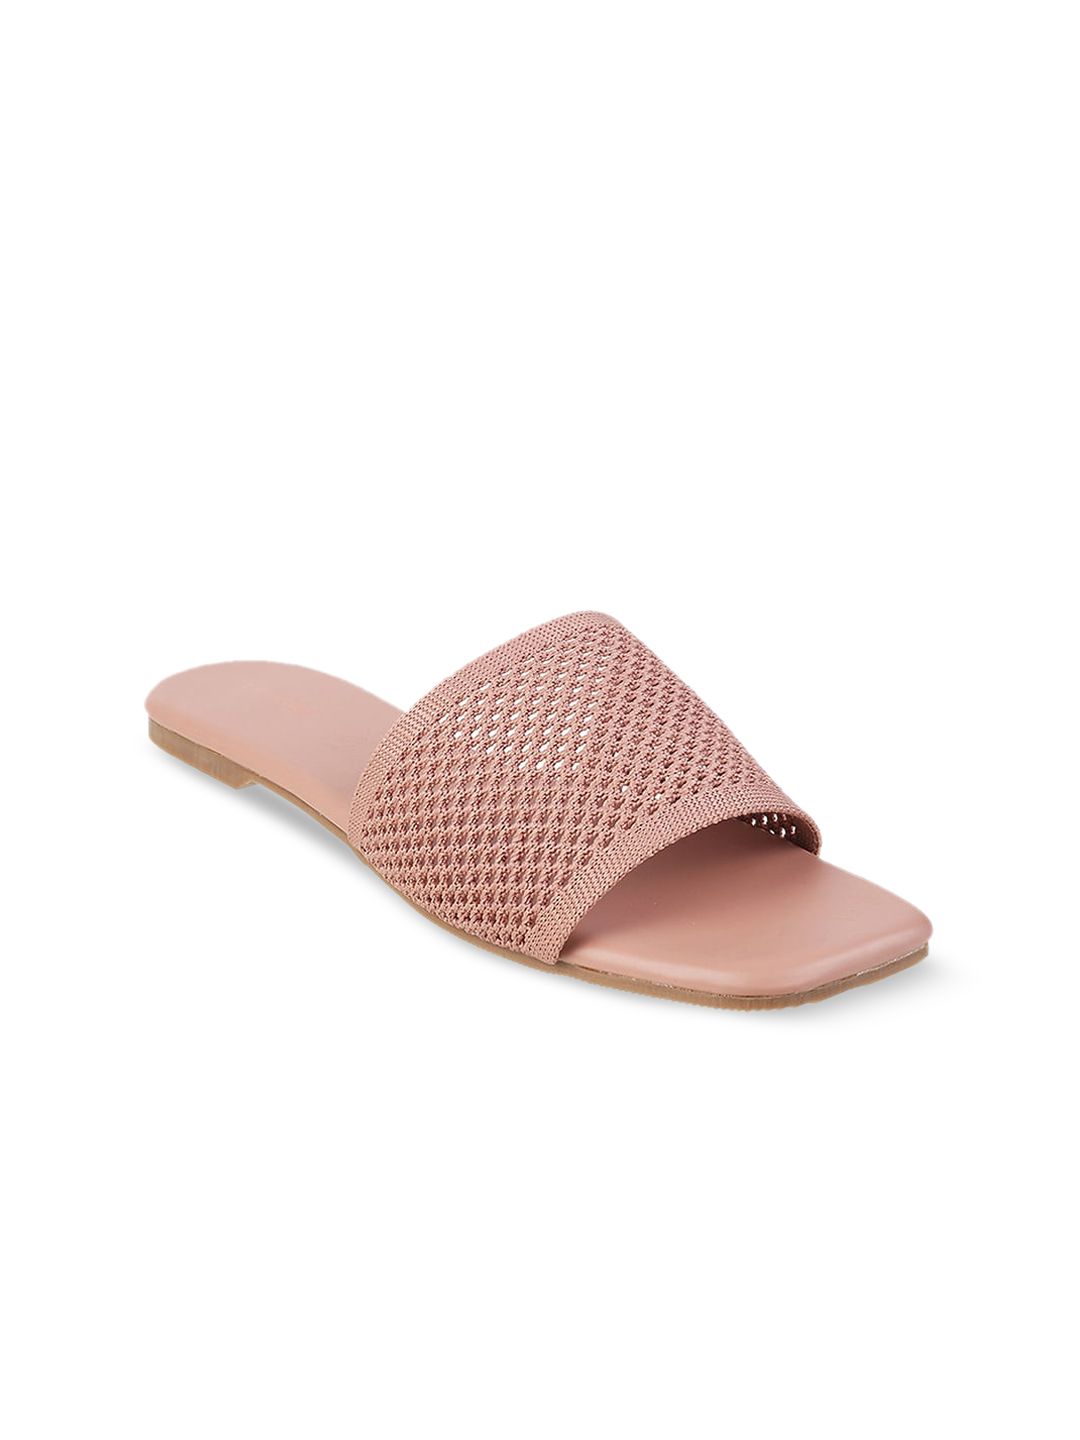 WALKWAY by Metro Women Peach-Coloured Open Toe Flats Price in India